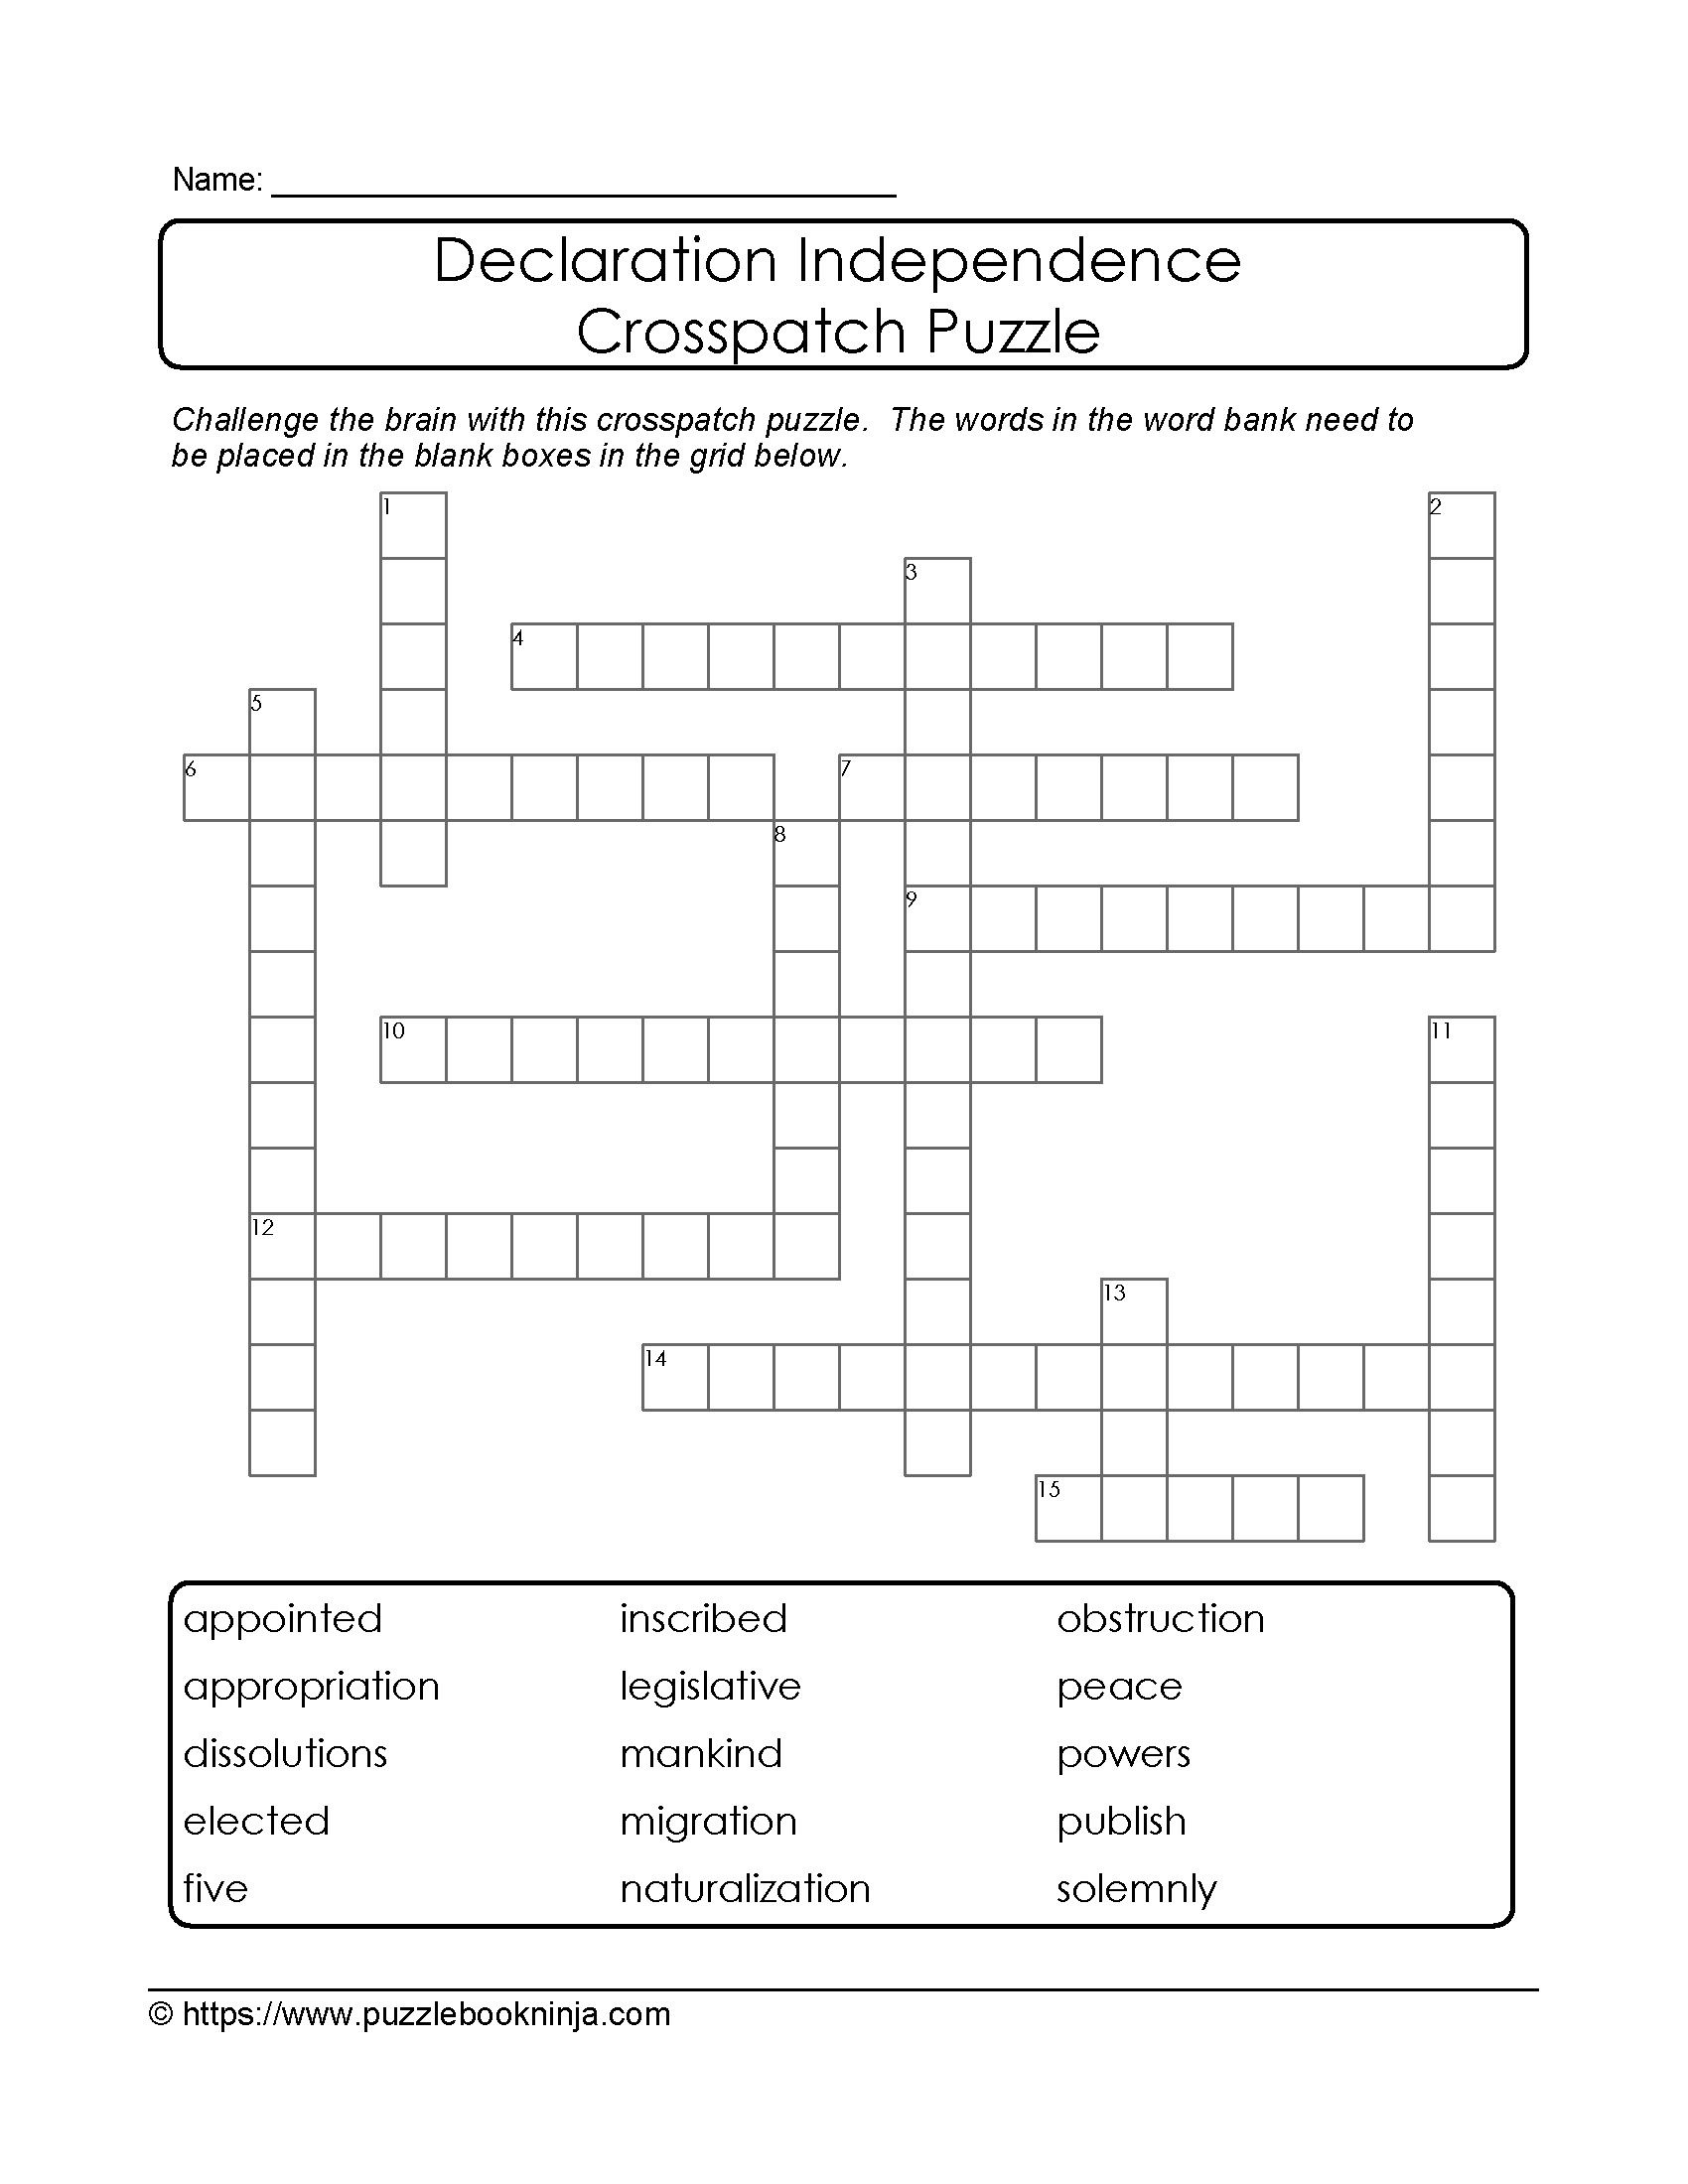 Crosspatch Declaration Independence Puzzle. Free. | Central | Puzzle - Printable Puzzle Books